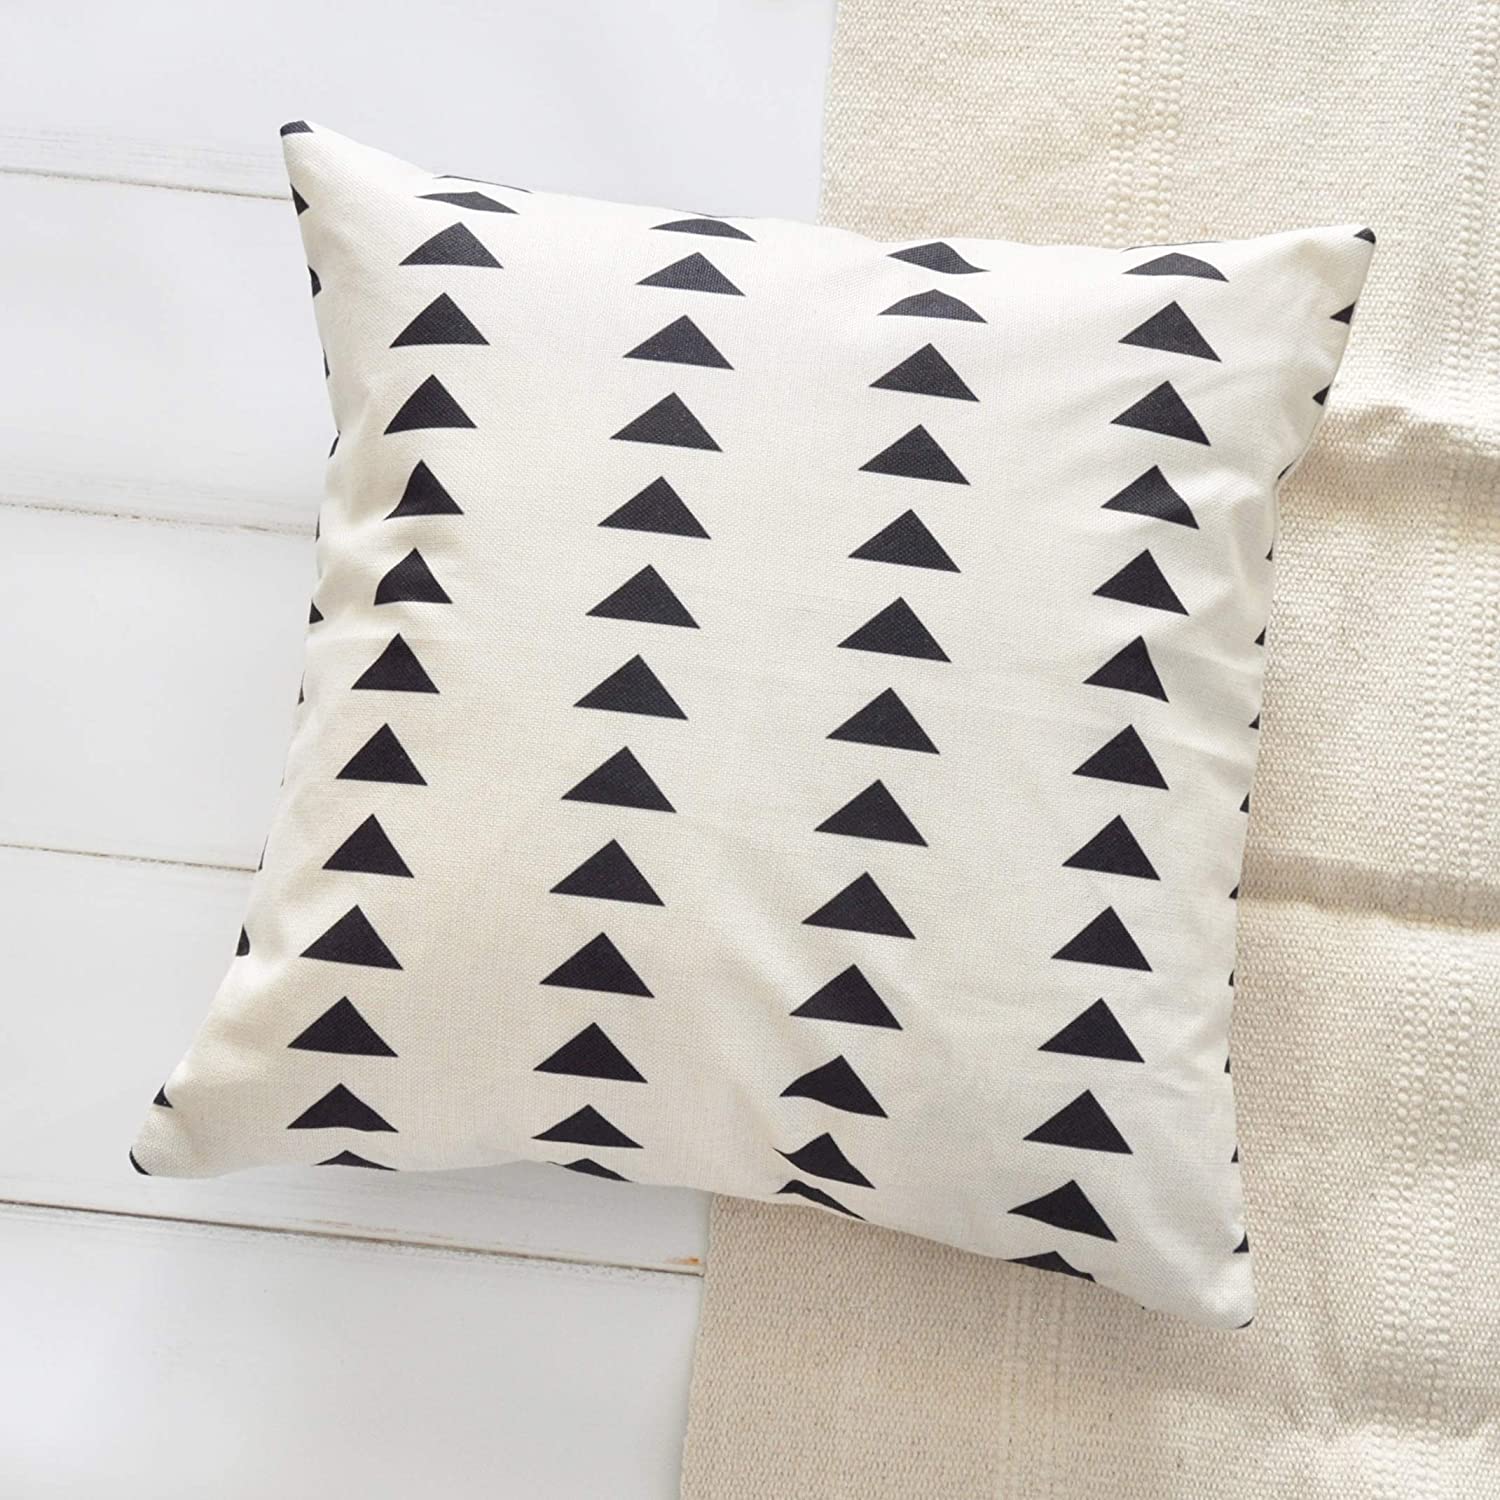 PANDICORN Set of 2 Boho Black and Cream/Off White Pillow Covers for Home Décor, African Mudcloth Throw Pillow Cases for Couch Sofa, Geometric Black Triangle, 18 x 18 Inch